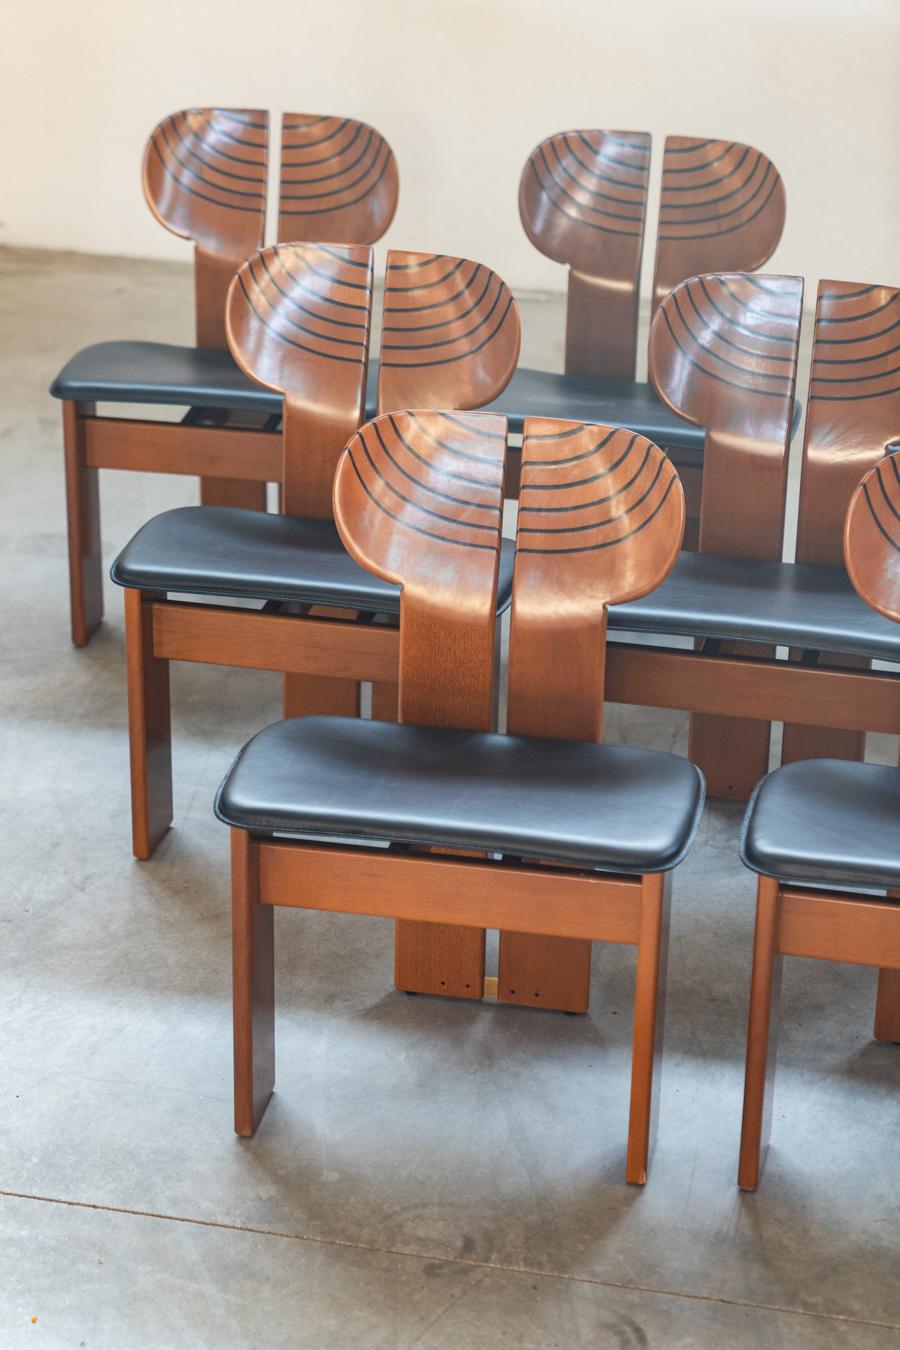 Set 12 chairs Afra & Tobia Scarpa mod. Africa - Gruppo Unico, 80/90
Style
Vintage
Periodo del design
1980 - 1989
Production Period
1980 - 1989
Year Manufactured
1980
Country of Manufacture
Italy
Maker
Scarpa, Afra
Manufacturer
Maxalto
Marchio di